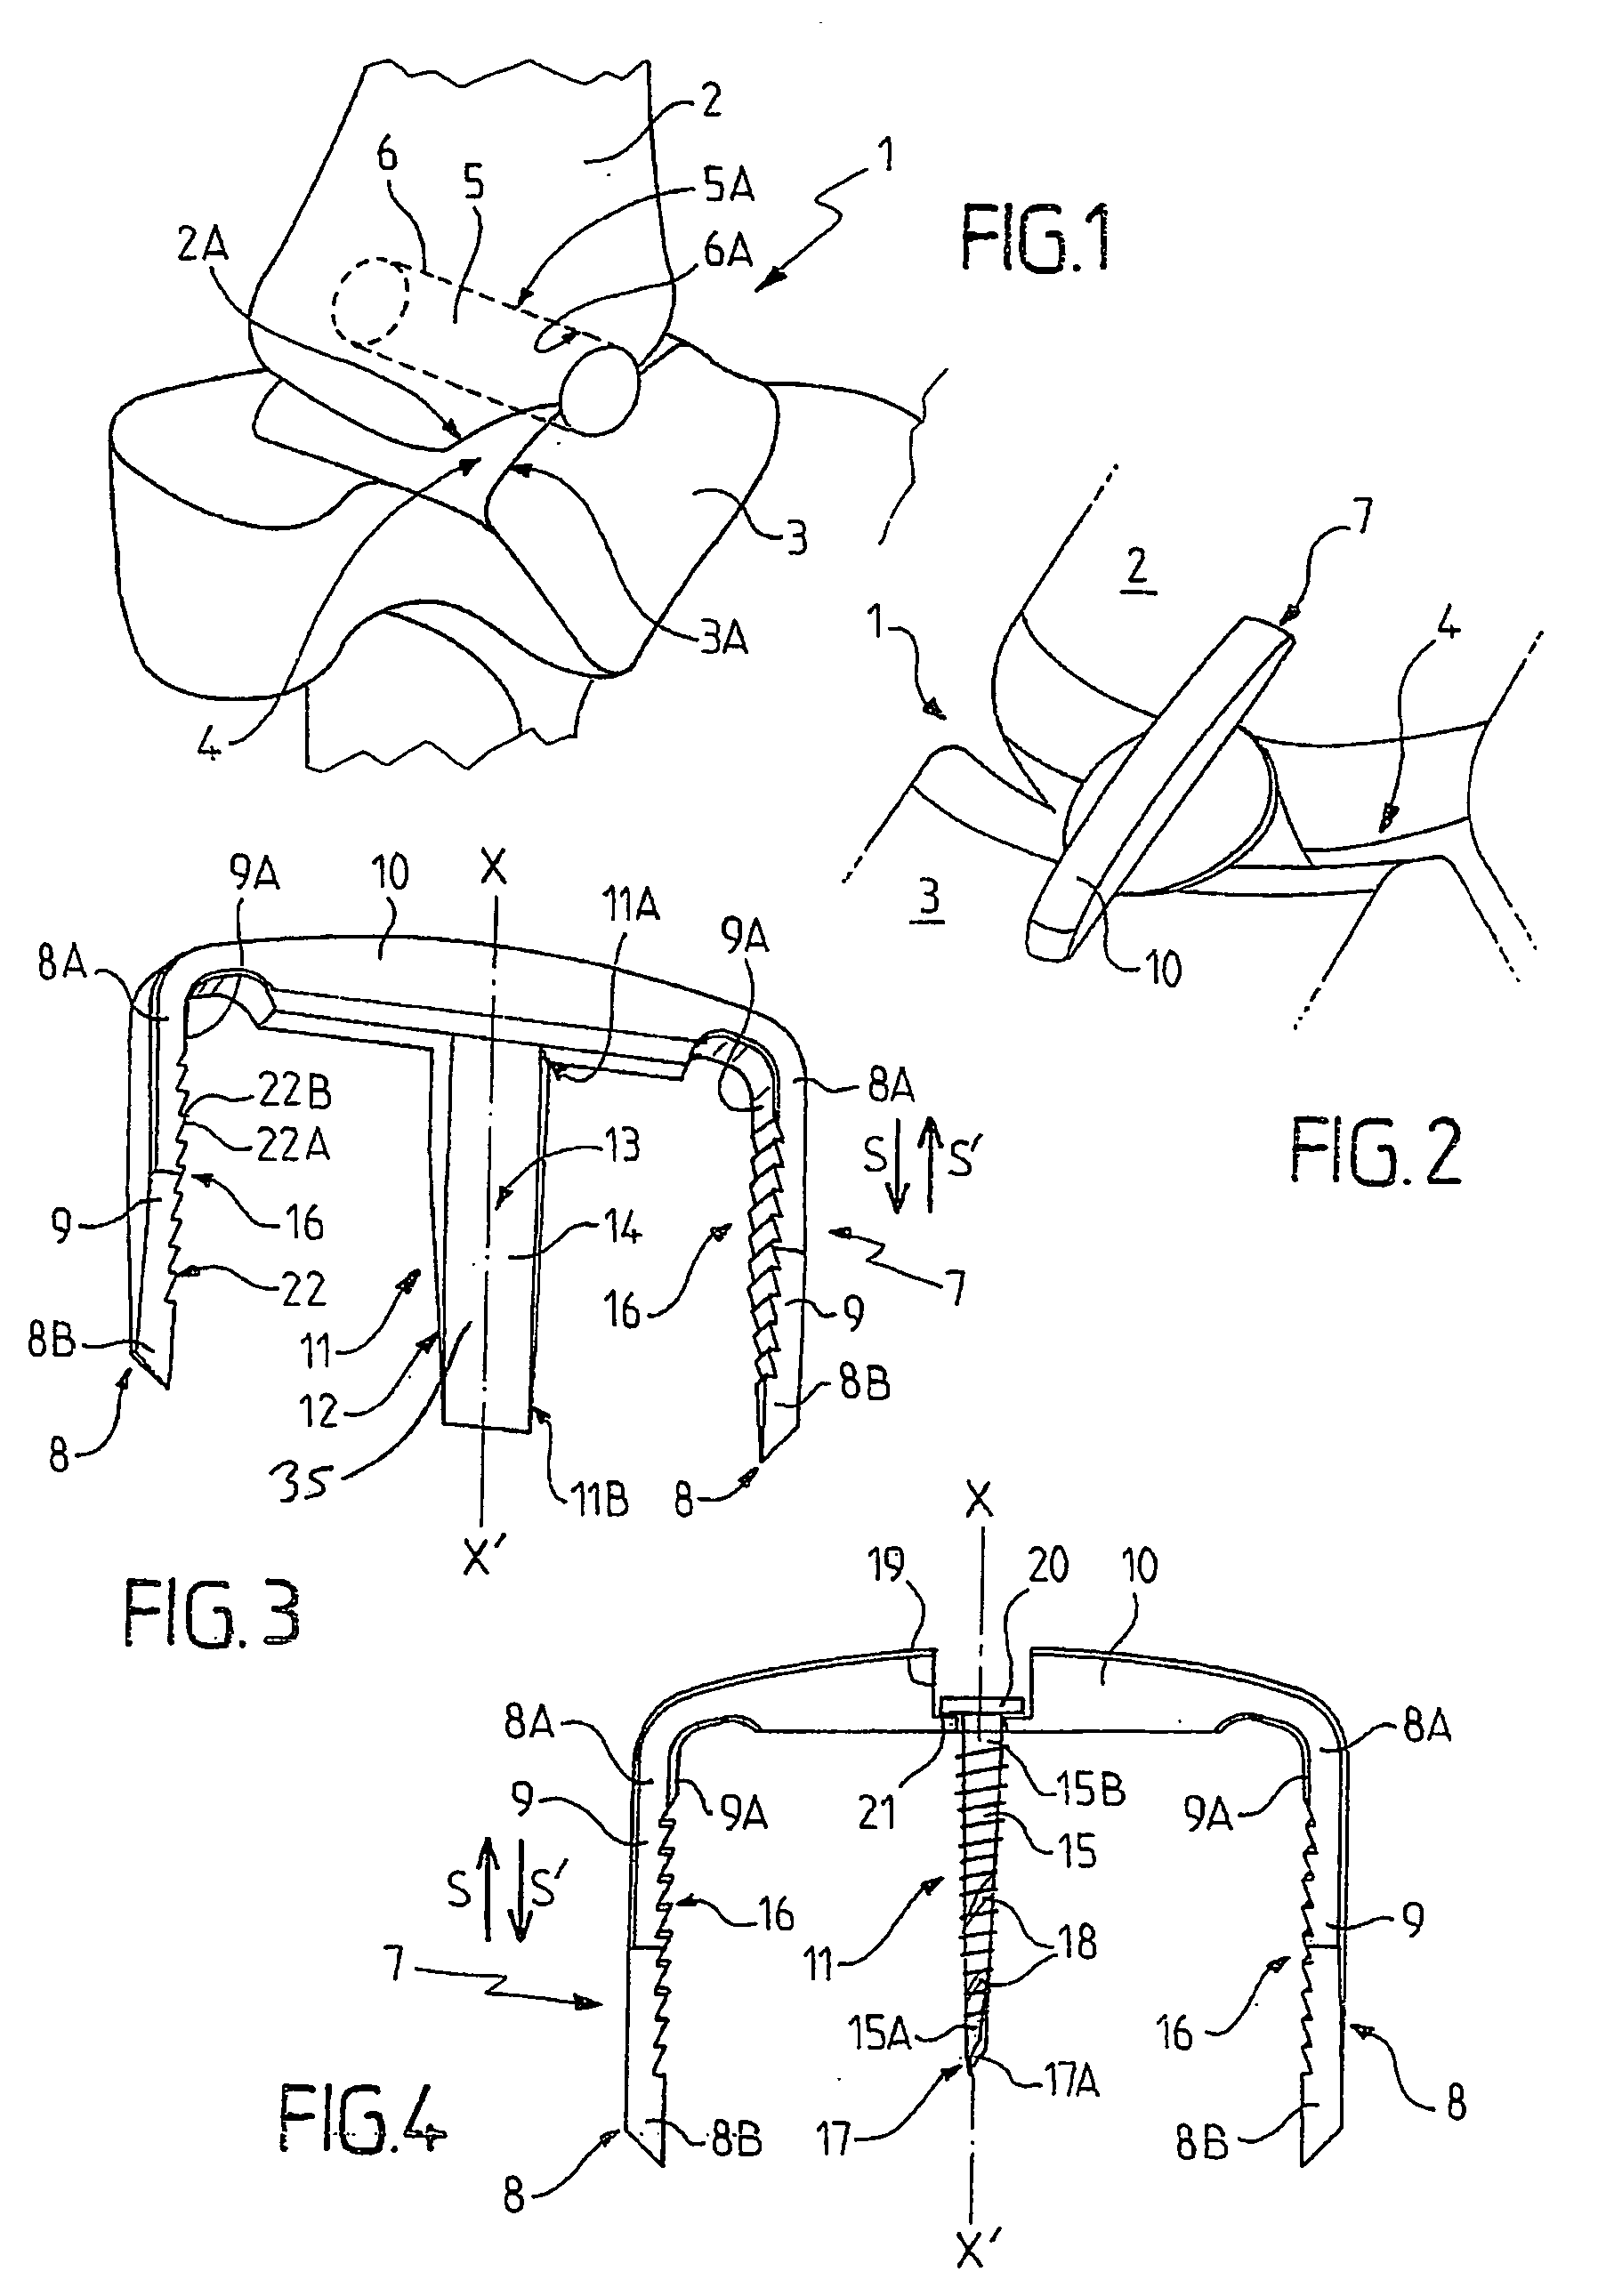 Fixation implant for a bone graft within a joint for the purpose of ensuring arthrodesis of the joint